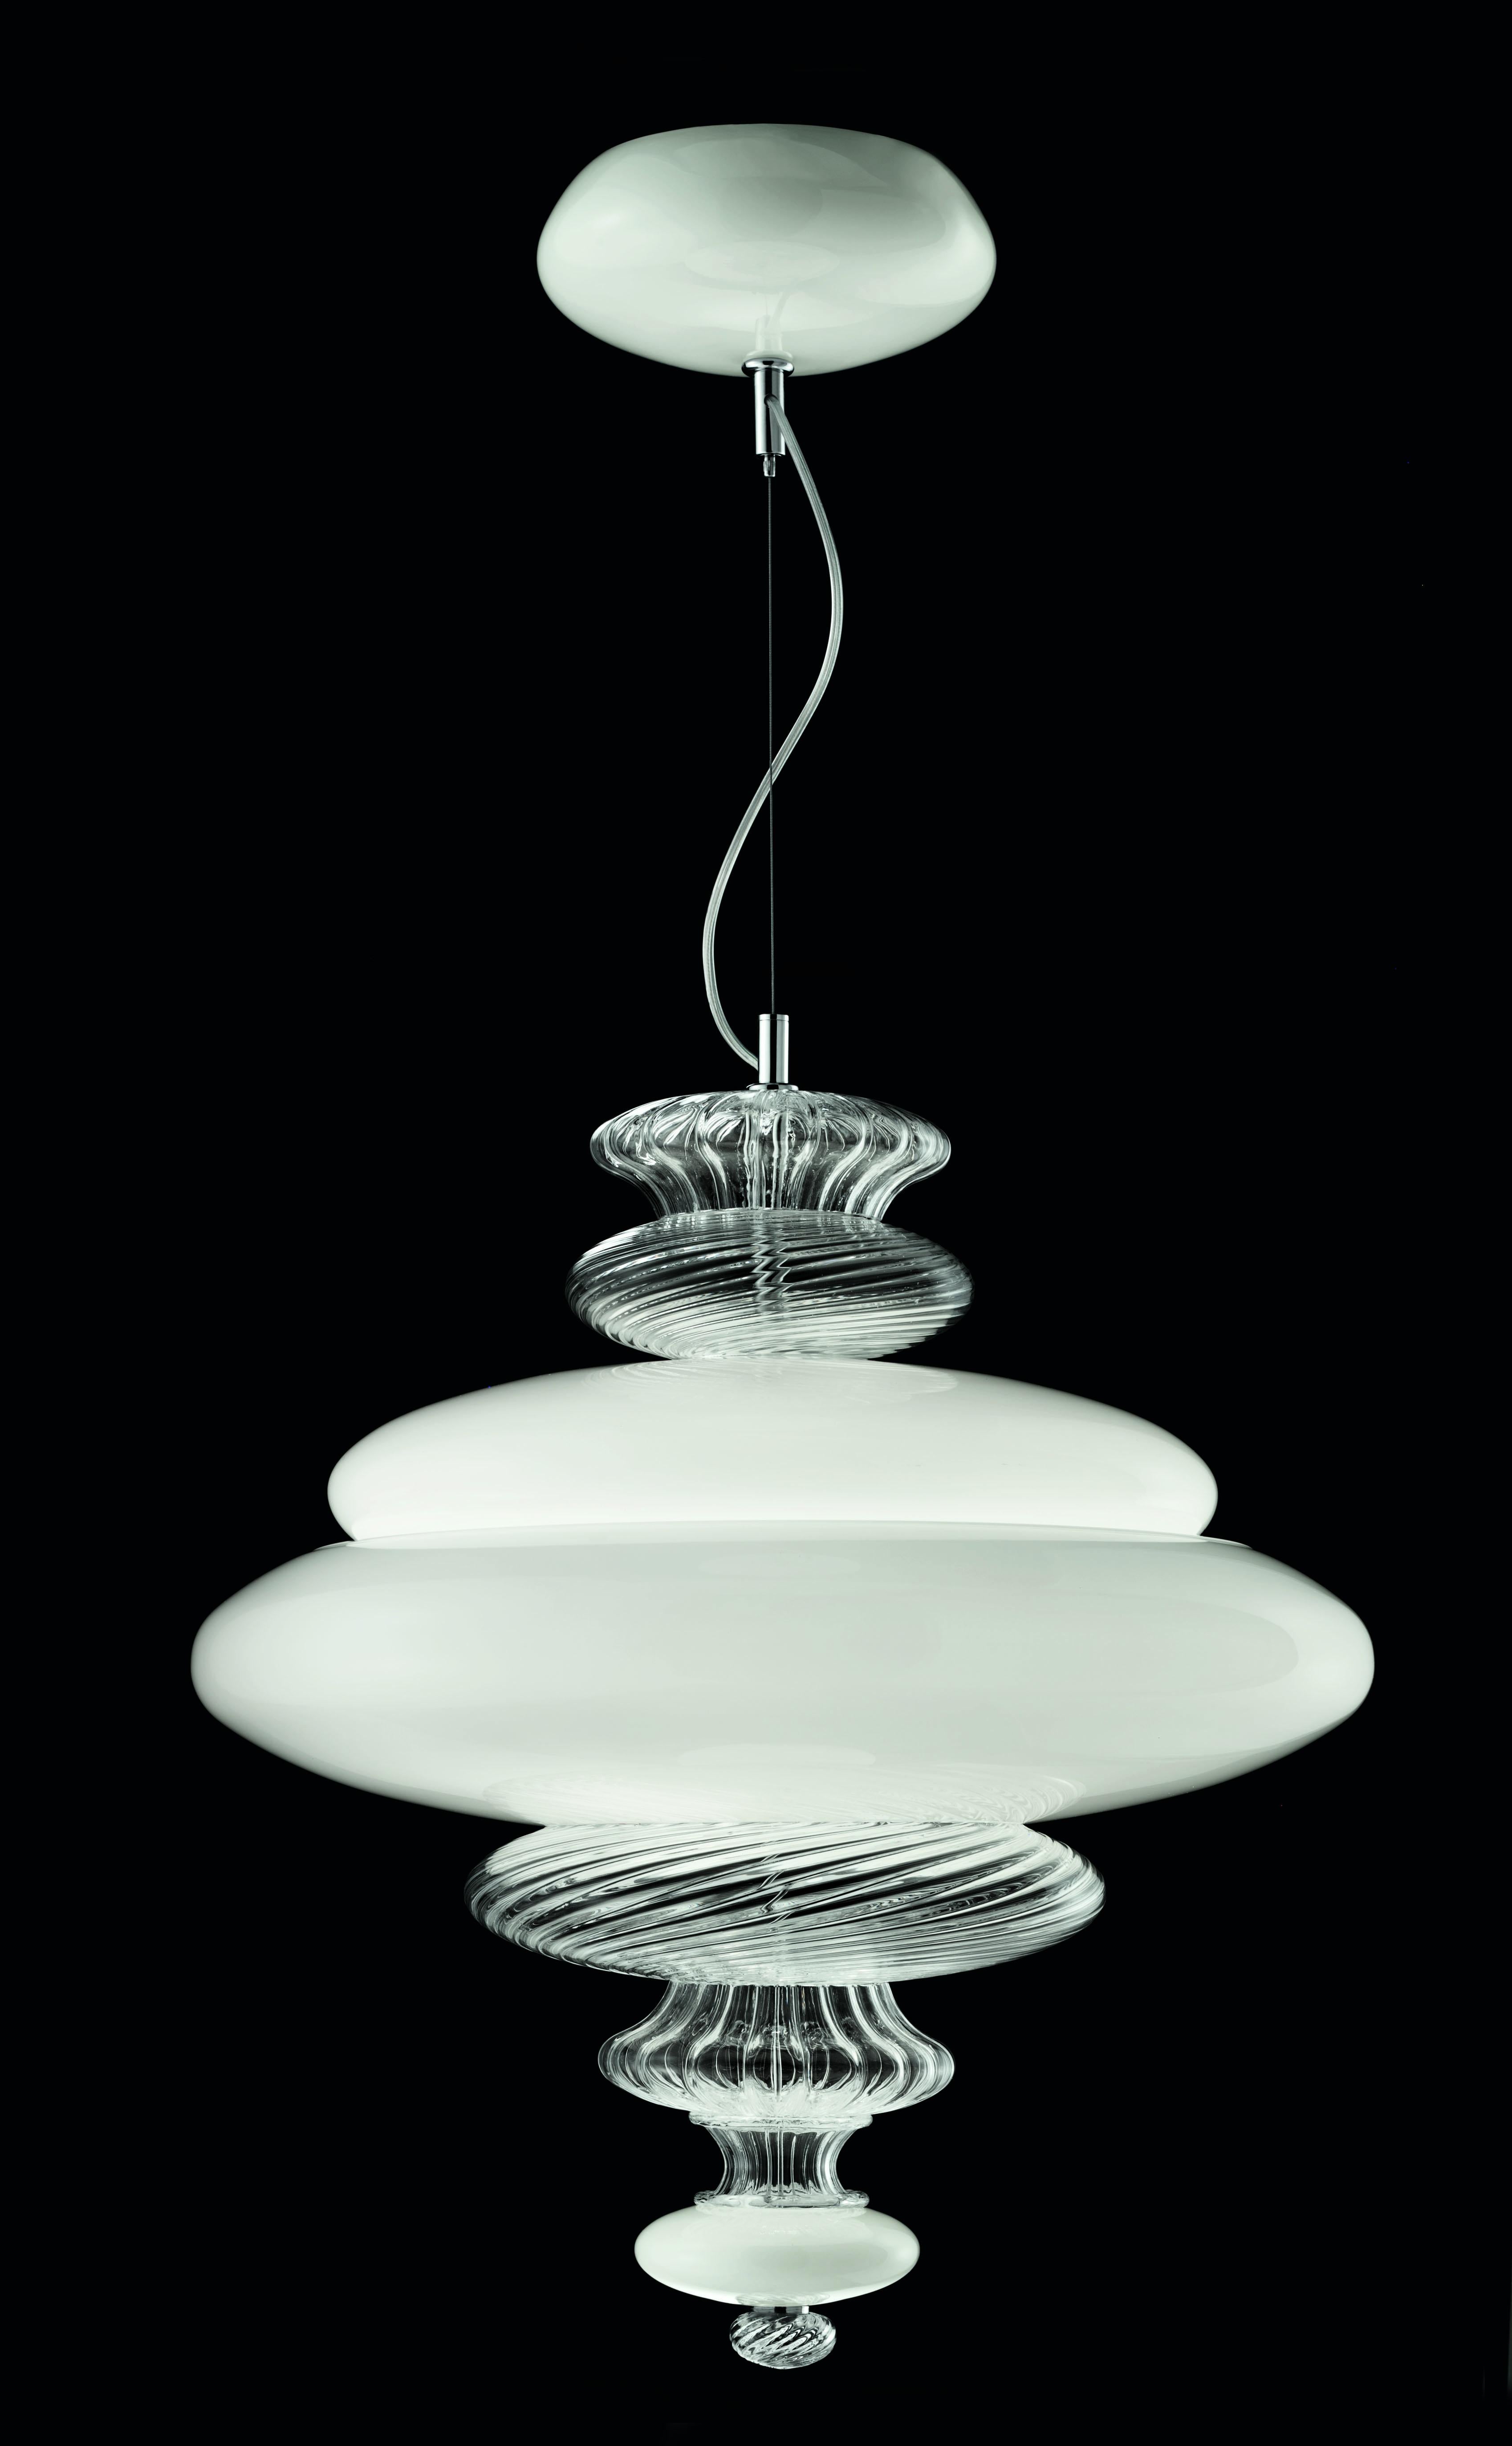 Pigalle 5692 Suspension Lamp in White/Crystal Glass, by Barovier&Toso 1